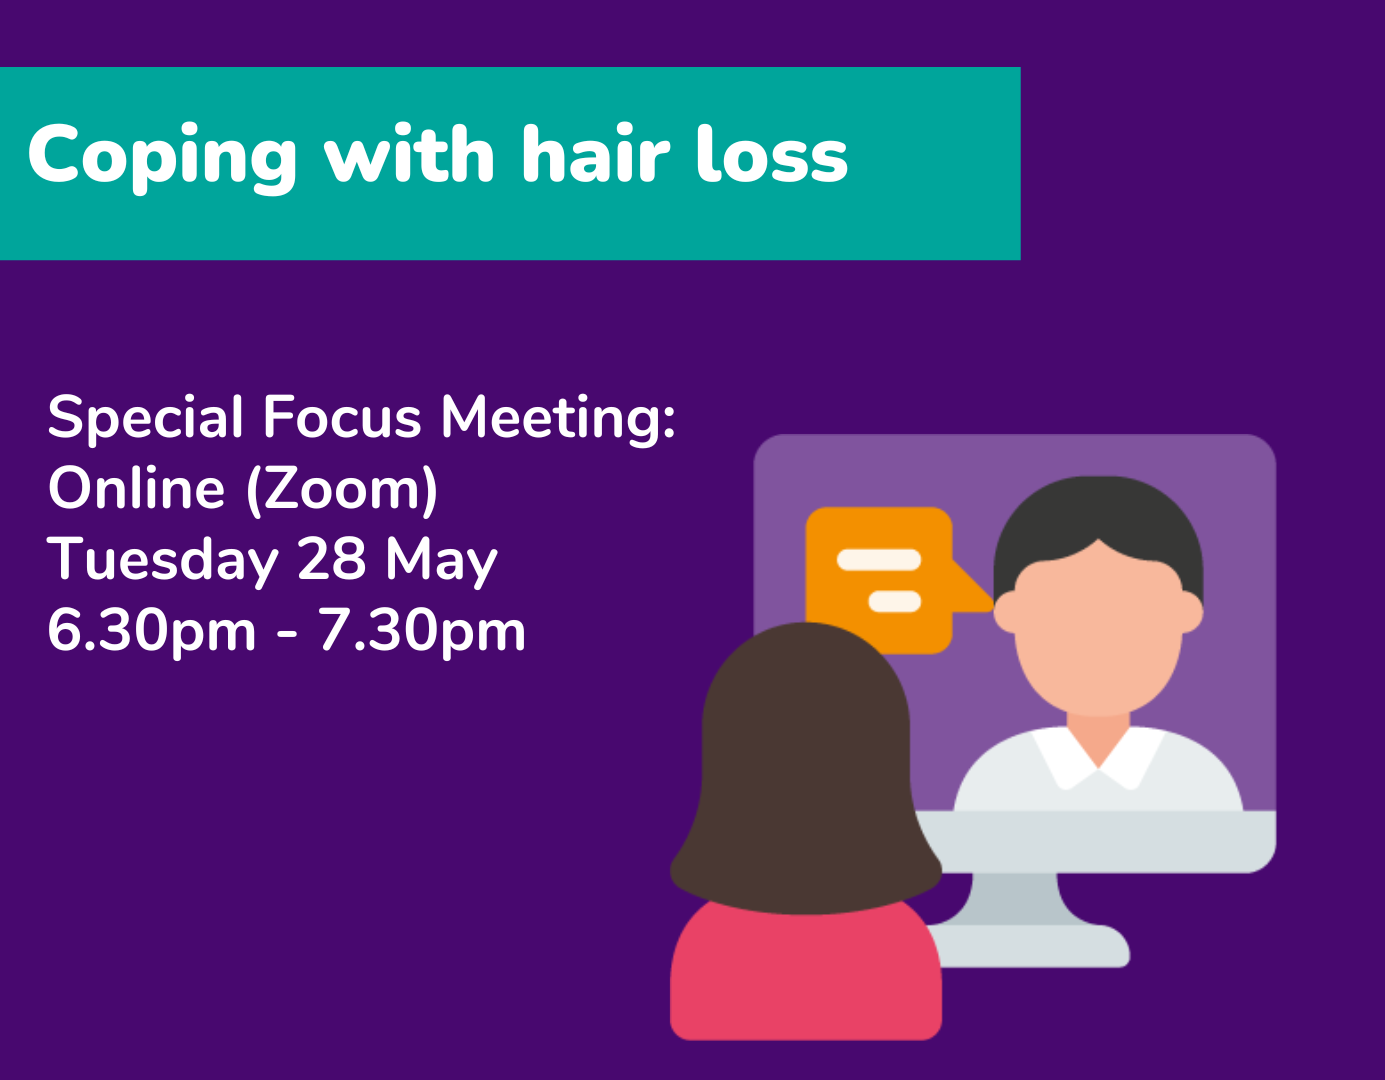 Coping with hair loss special focus meeting online (Zoom) Tuesday 28 May 6.30pm - 7.30pm